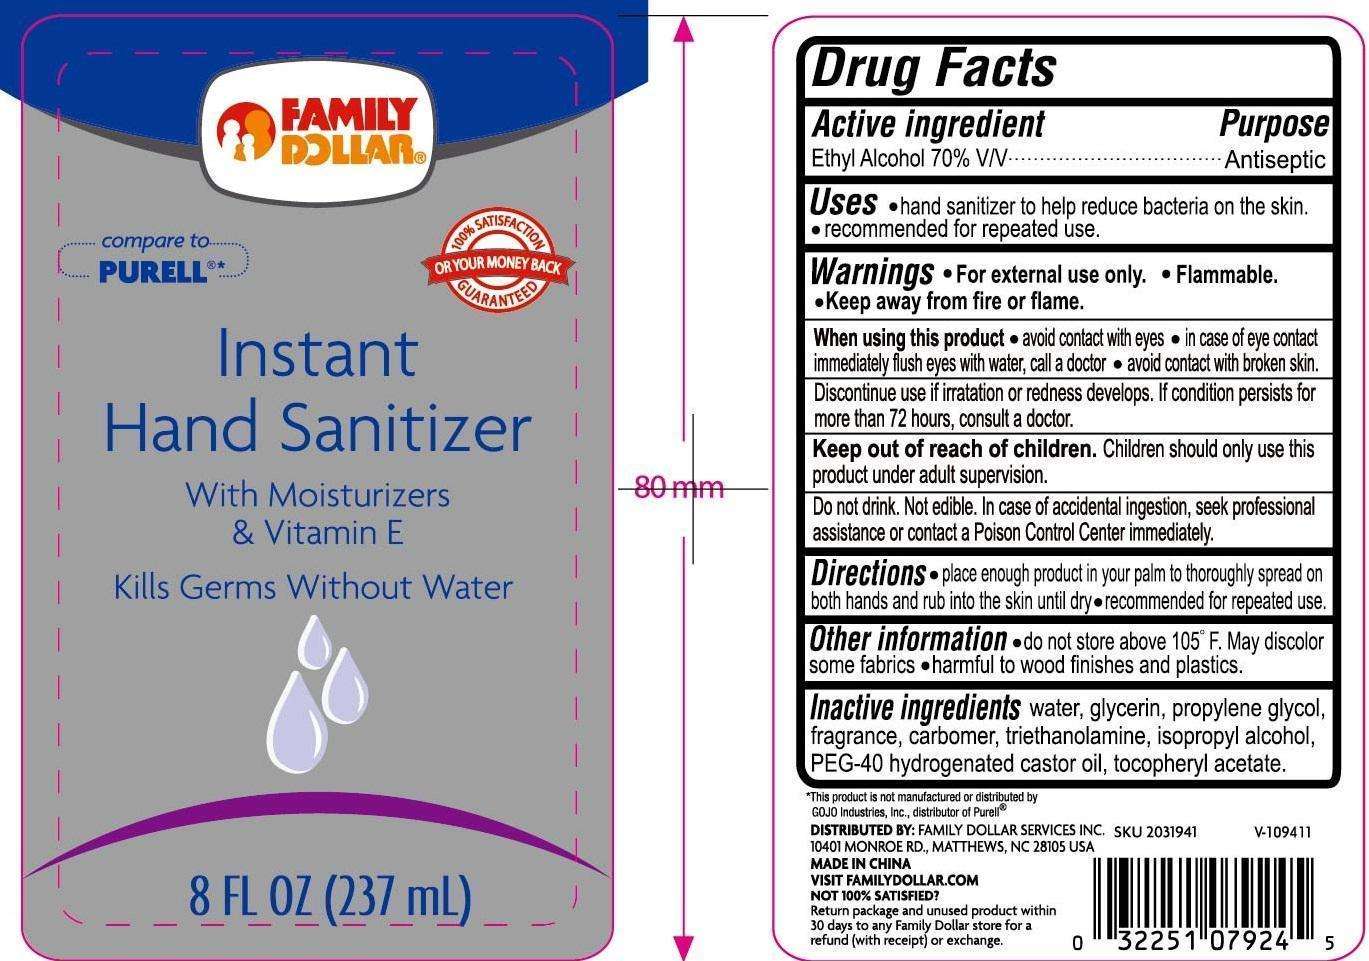 Family Dollar Instant Hand Sanitizer with Moisturizers and Vitamin E